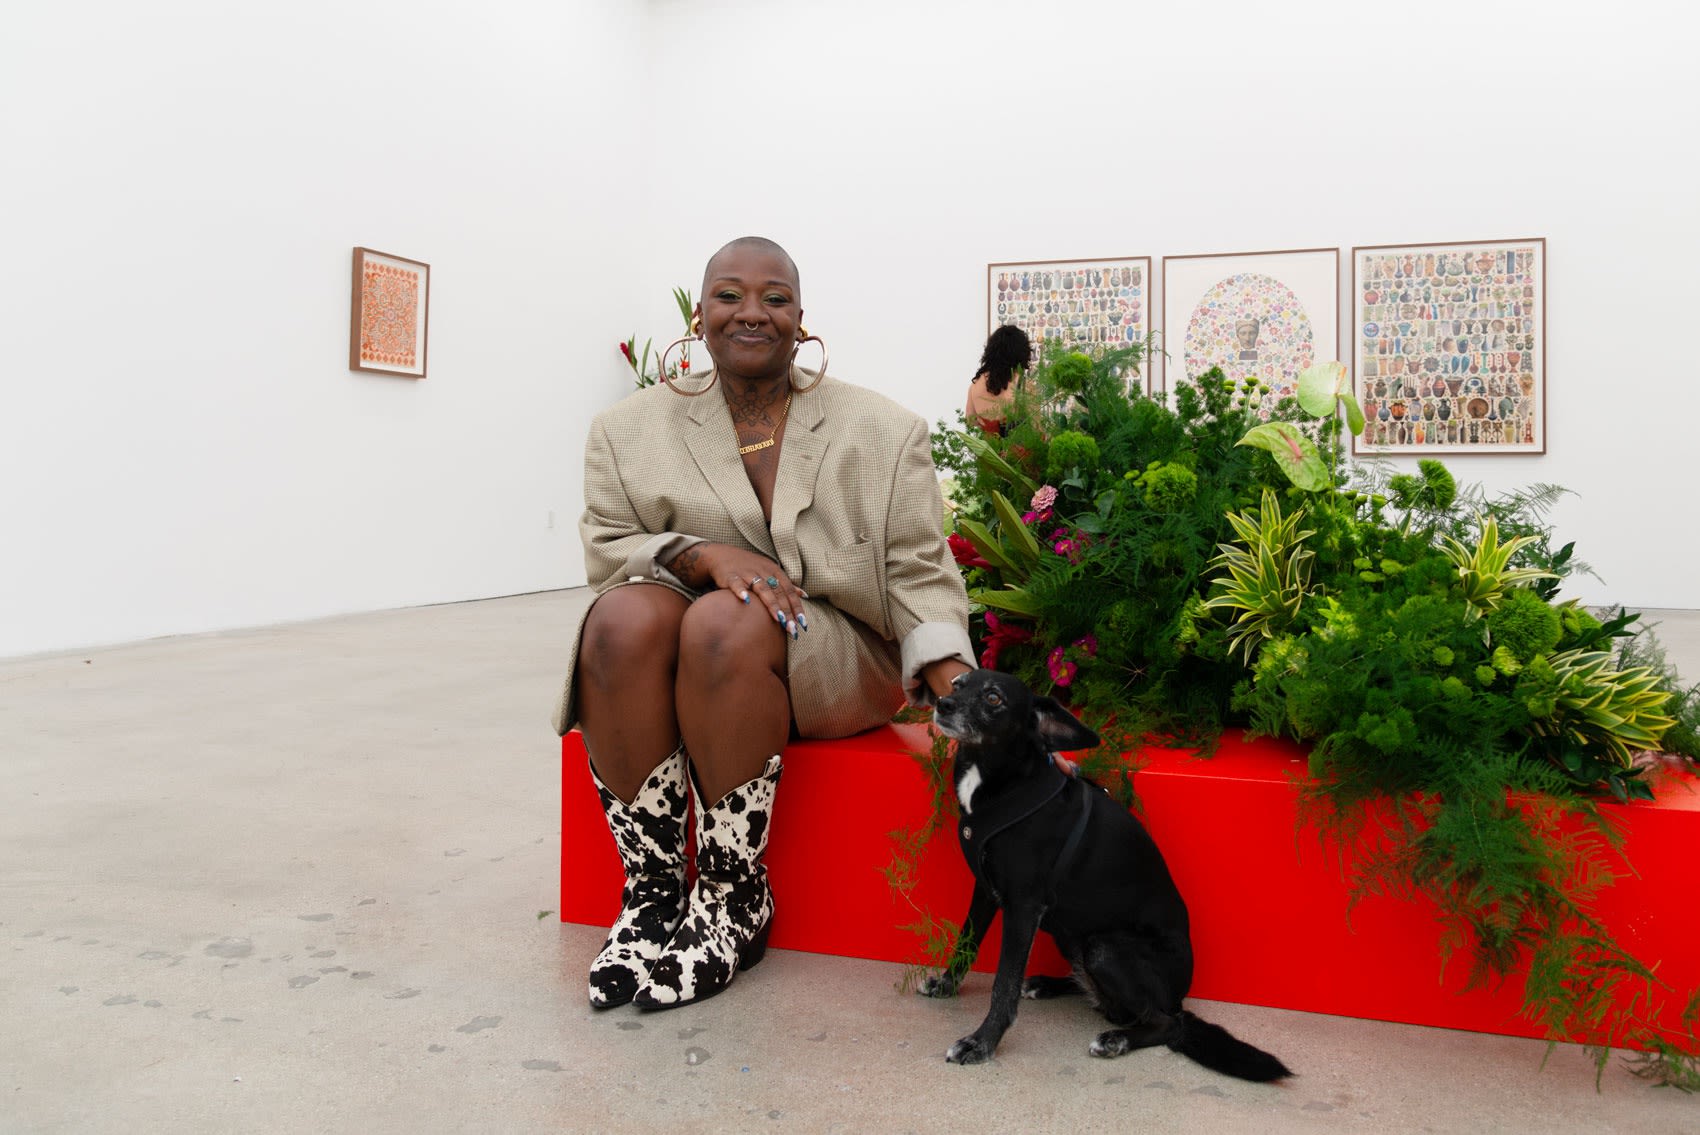 Flora Tosha Stimage sits on a red box next to her flower installation petting a small black dog in the gallery space